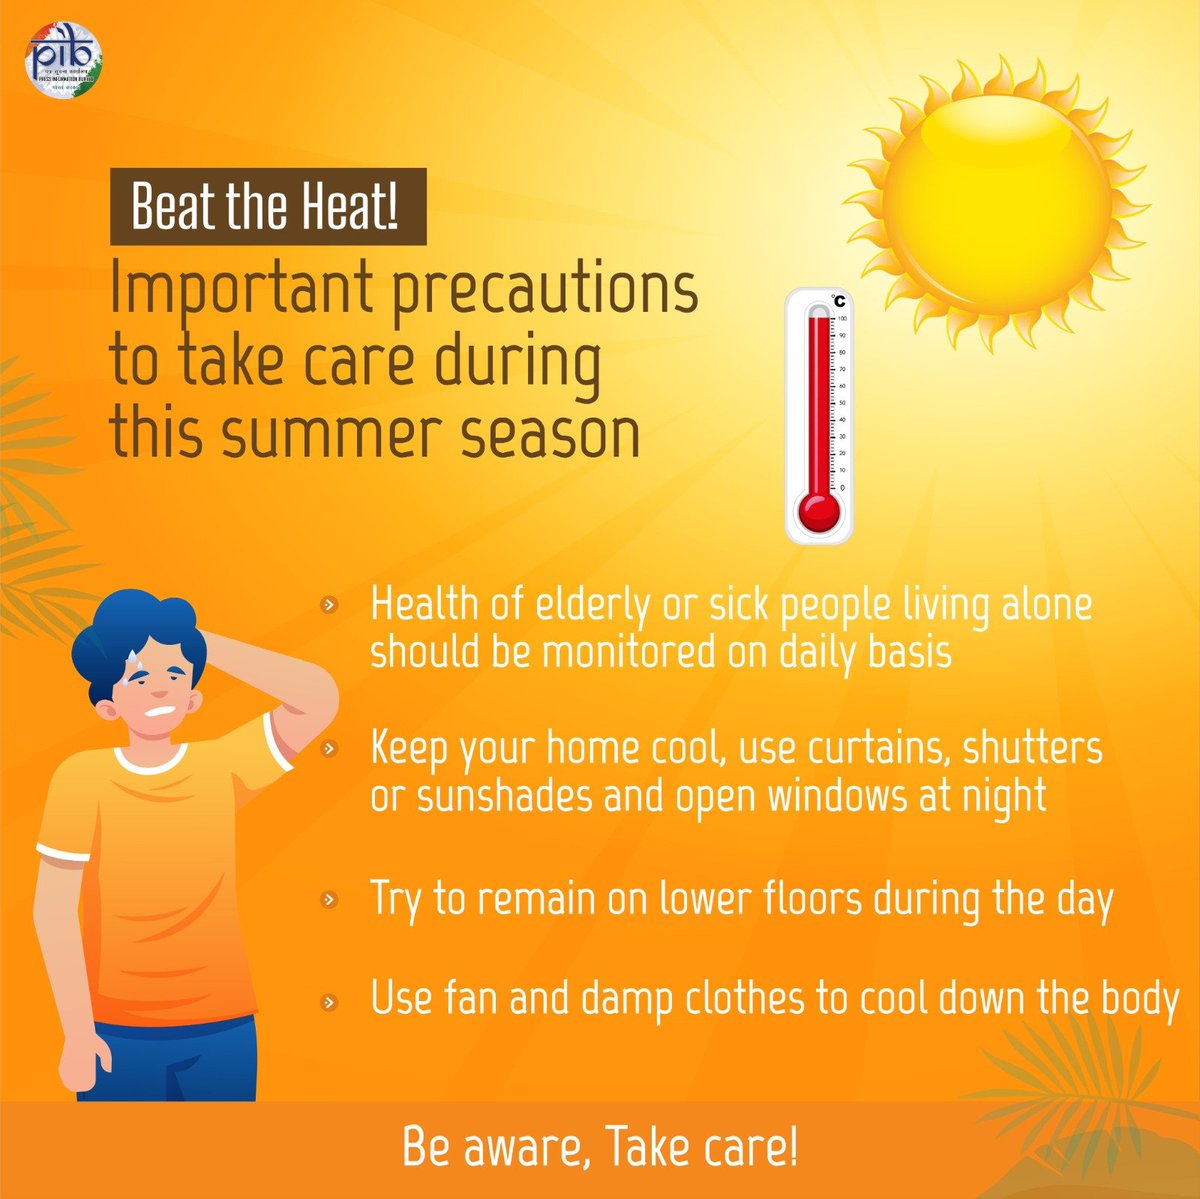 Beat the Heat! Necessary precautions to take care of during this summer season!👇 📷Try to remain on lower floors during the day  📷#BeatTheHeat #HeatWave
@PIB_India